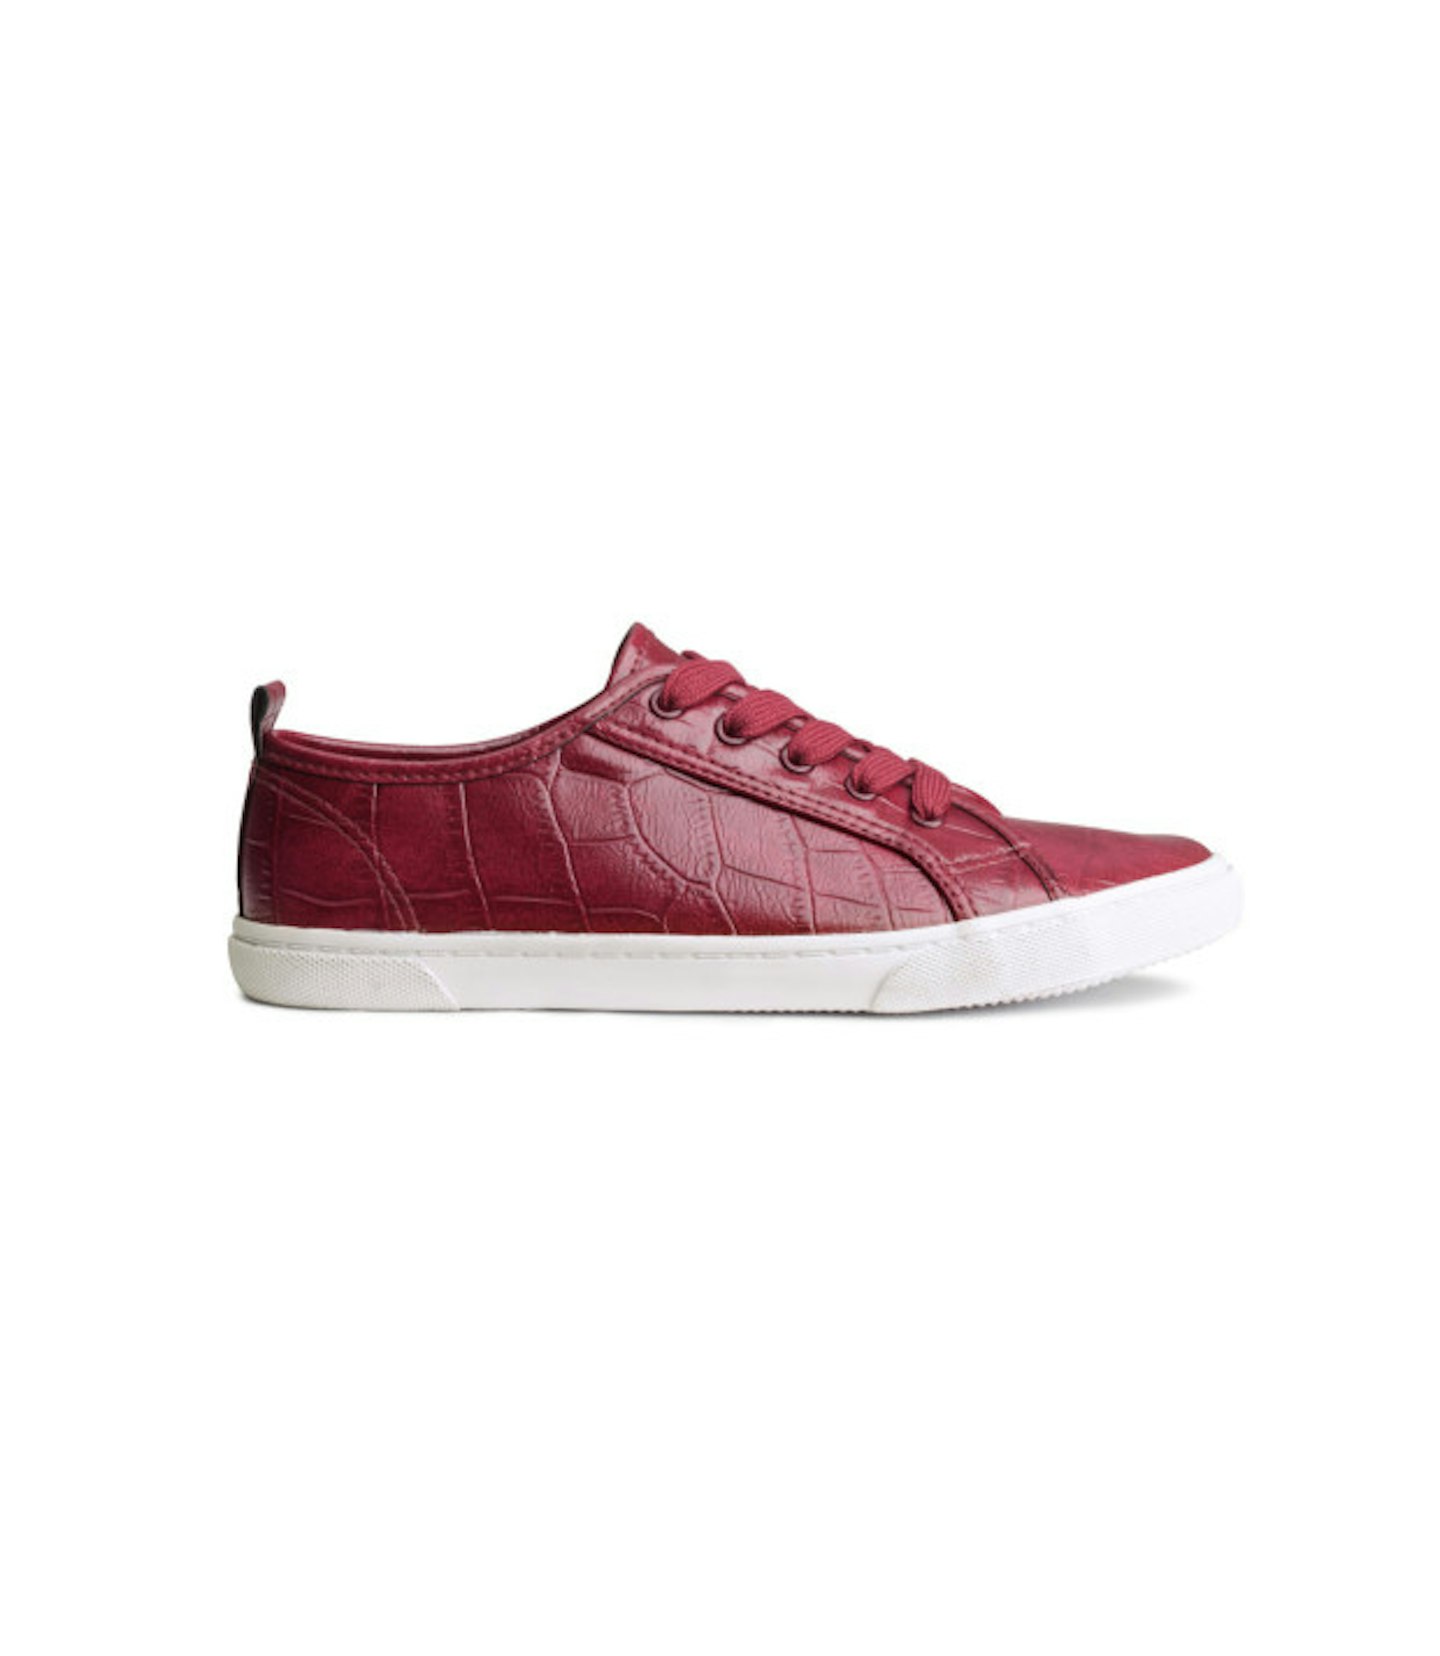 Red croc sneakers